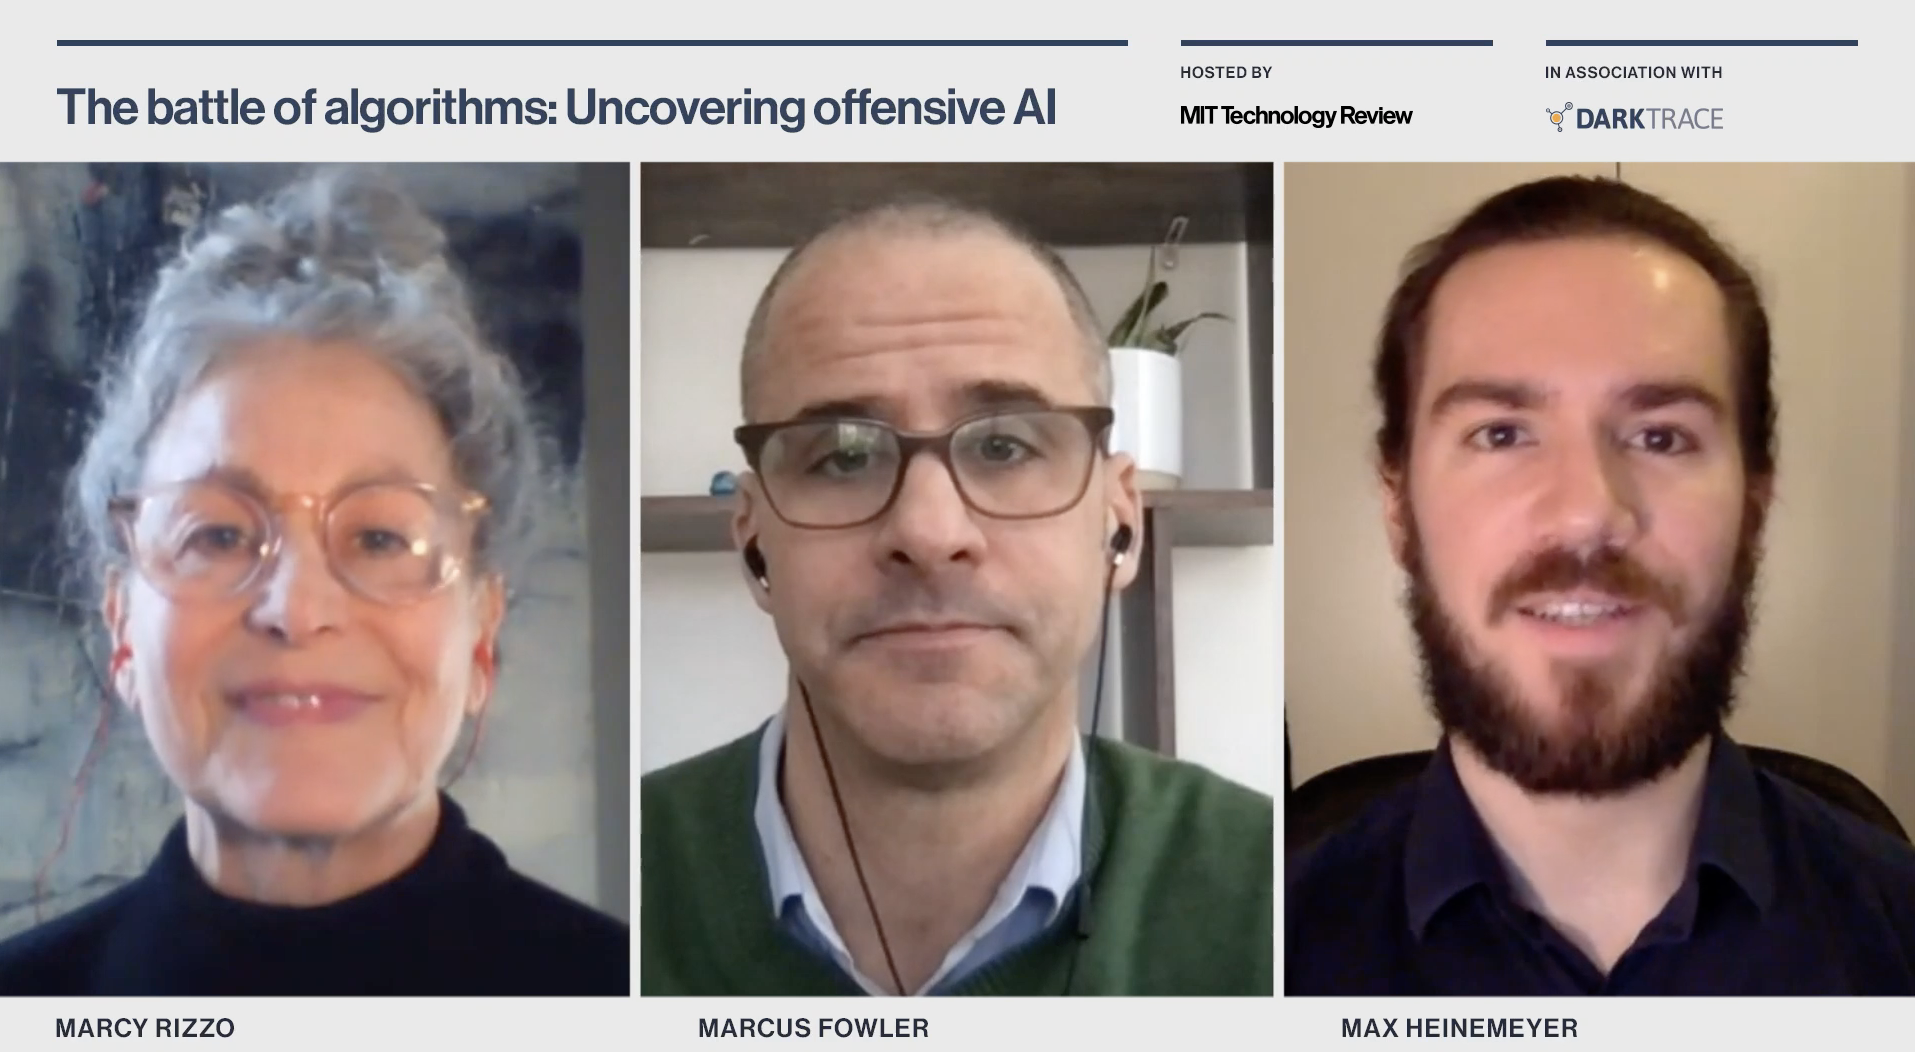 The battle of algorithms: Uncovering offensive AI